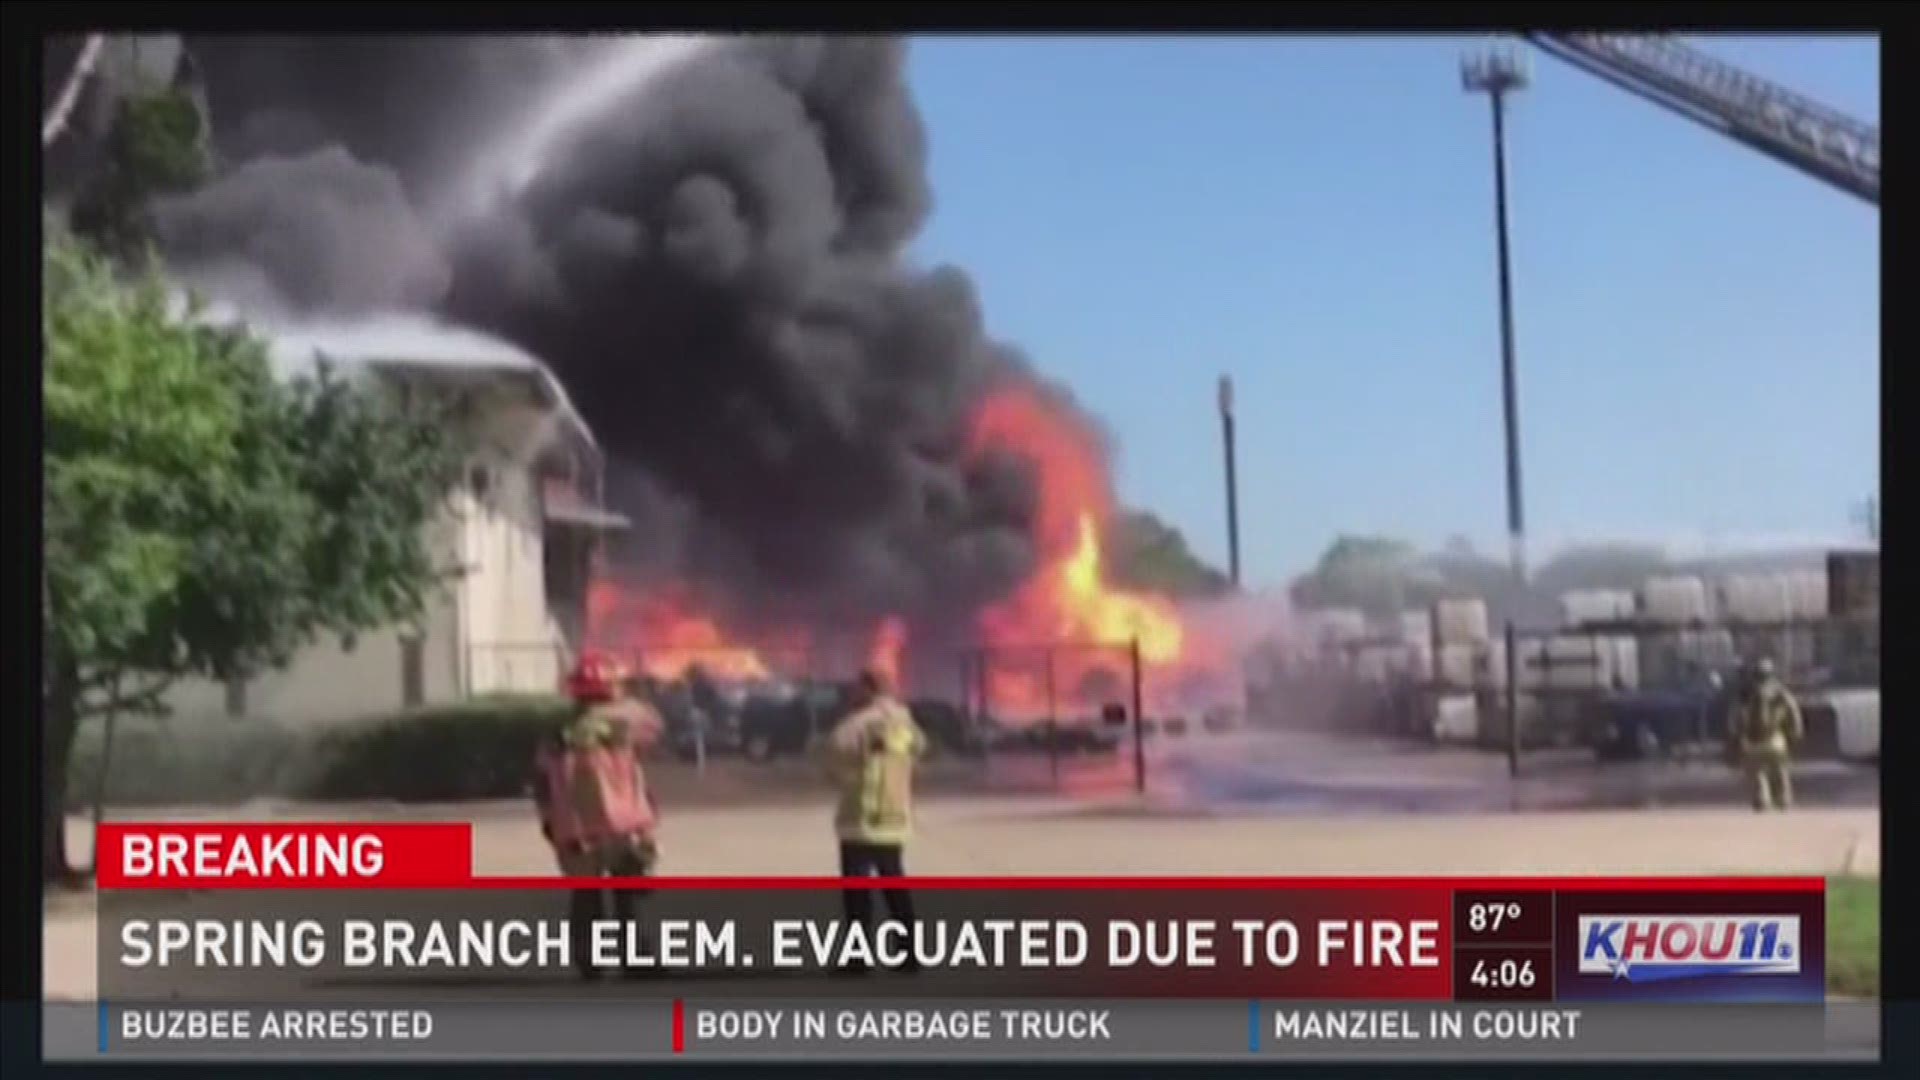 Hundreds of students and teachers had to evacuate Spring Branch Elementary after a massive 4-alarm fire destroyed a nearby warehouse. No injuries were reported.